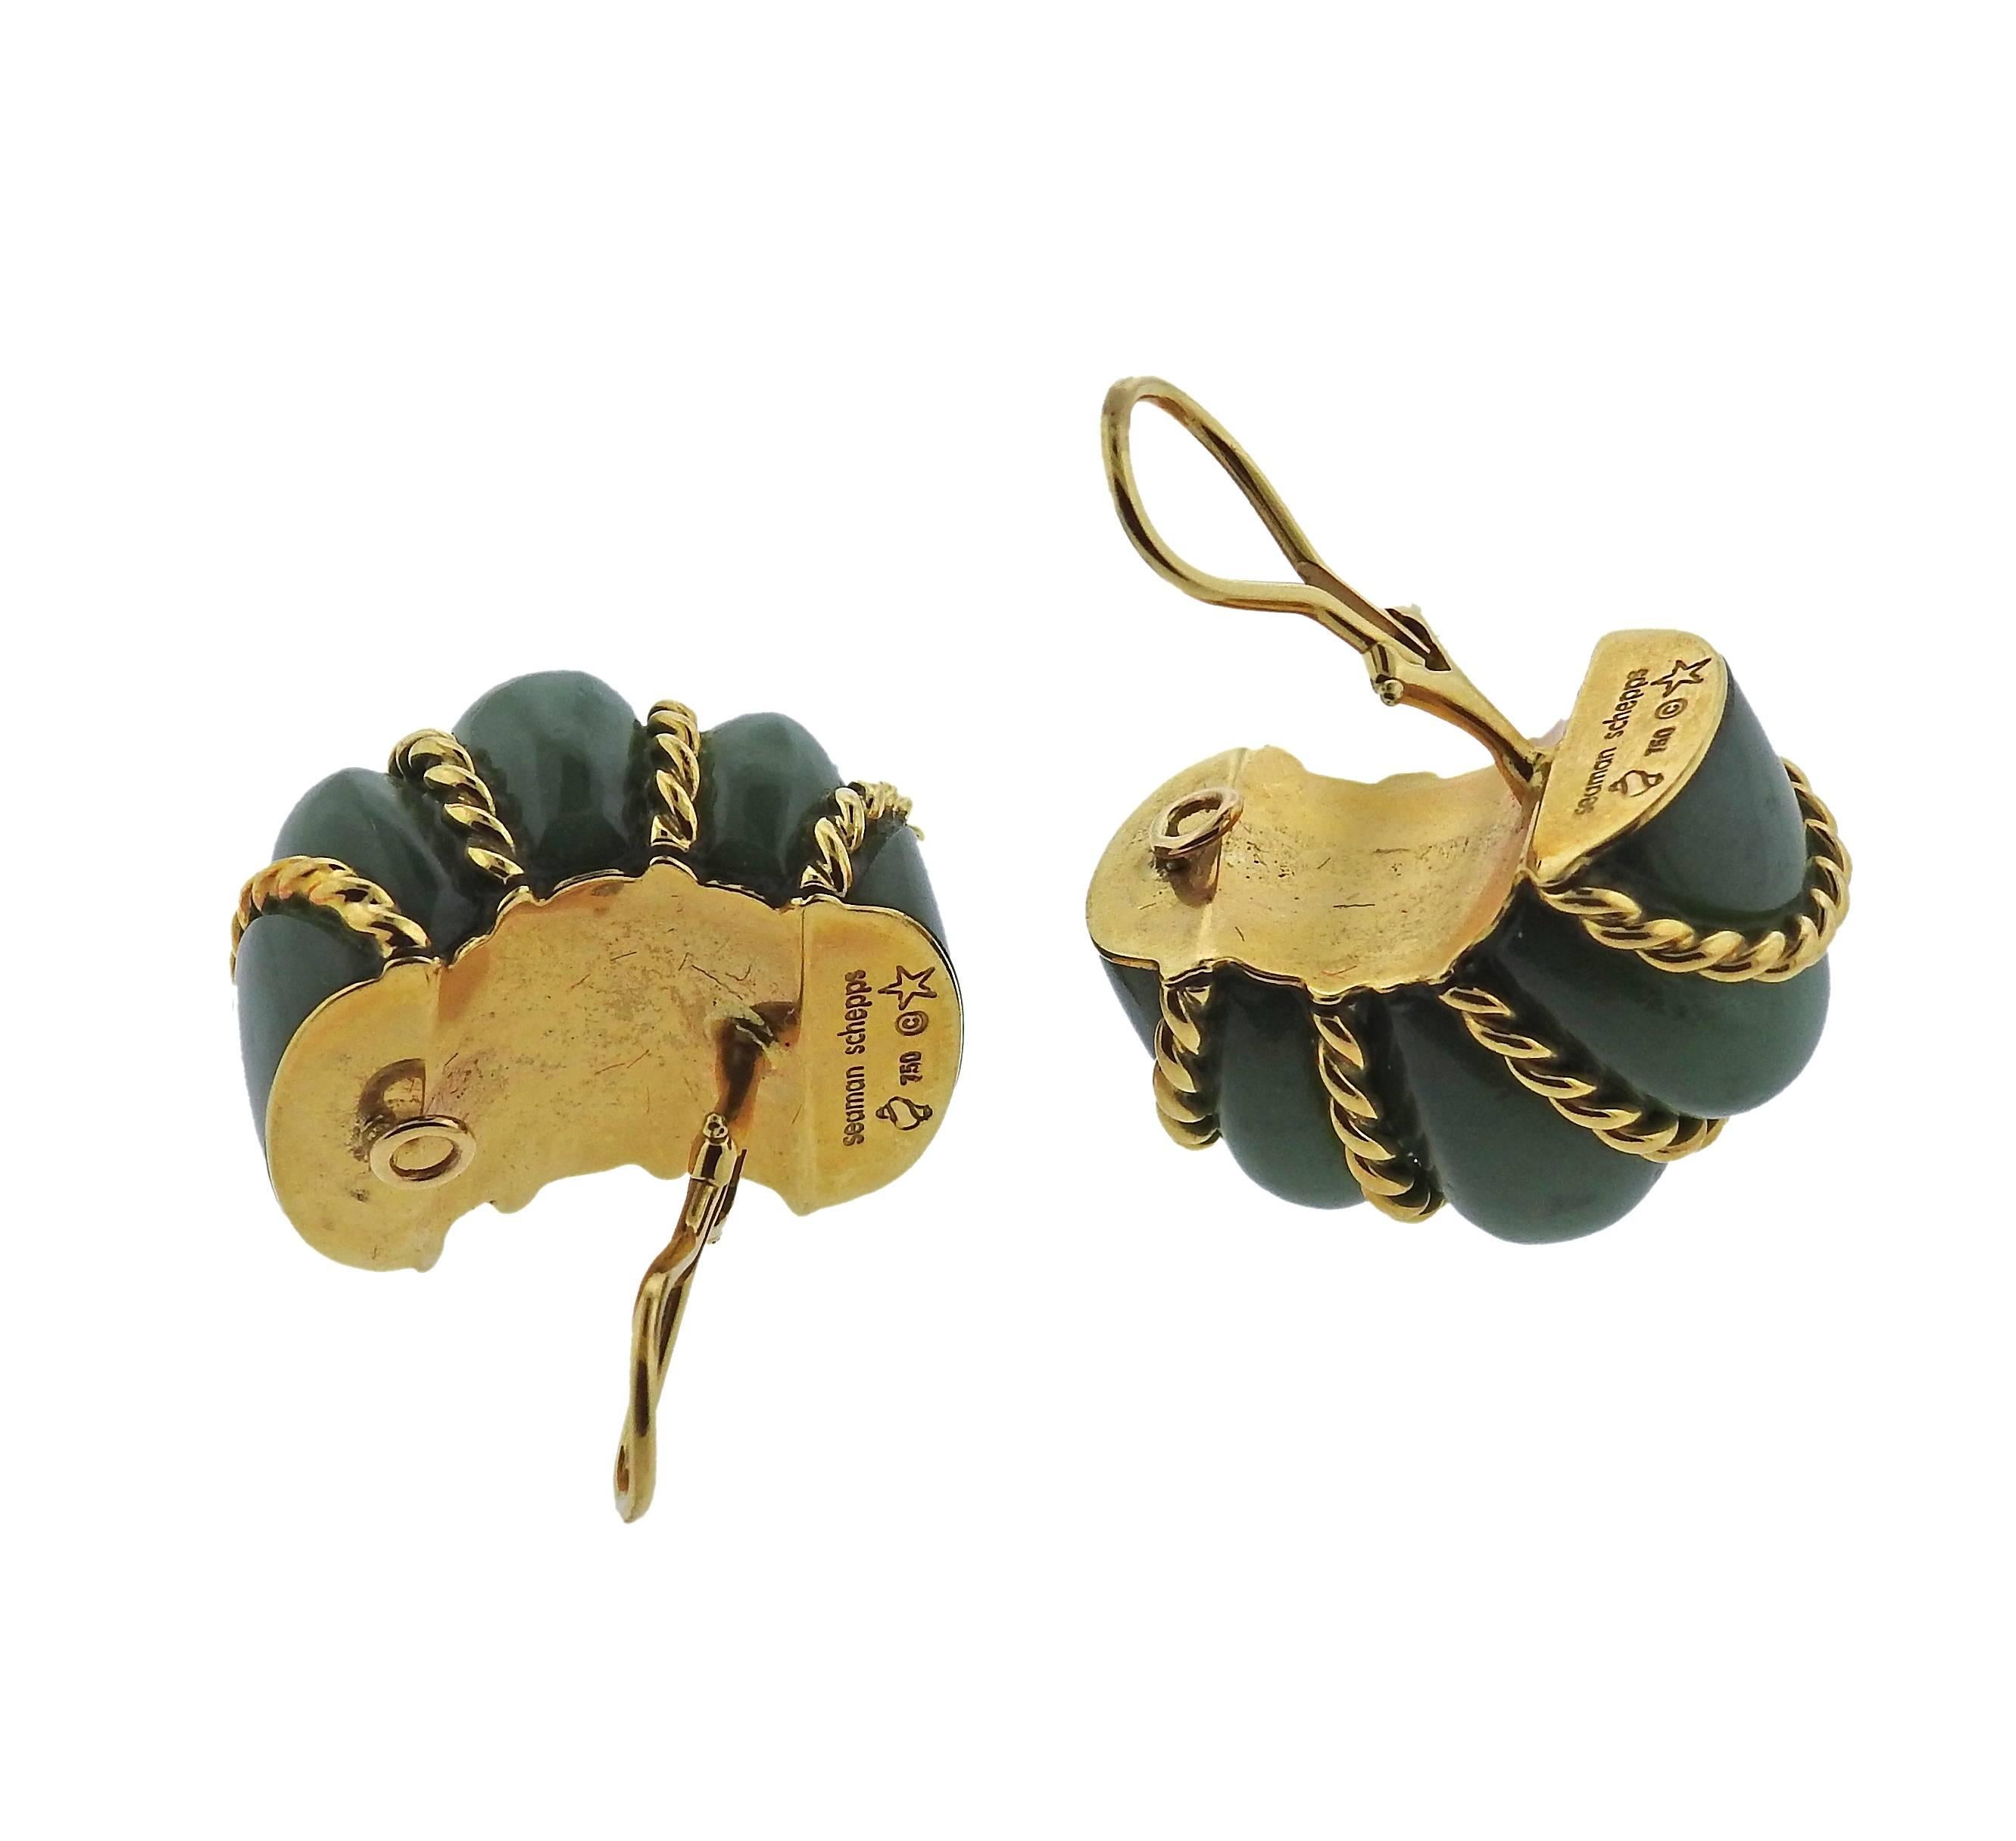 Pair of 18k gold shrimp earrings, crafted by Seaman Schepps, set with aventurine. Earrings measure 28mm x 20mm, weight - 49.8 grams. Marked: Star, Seaman Schepps, Shell mark, 750 